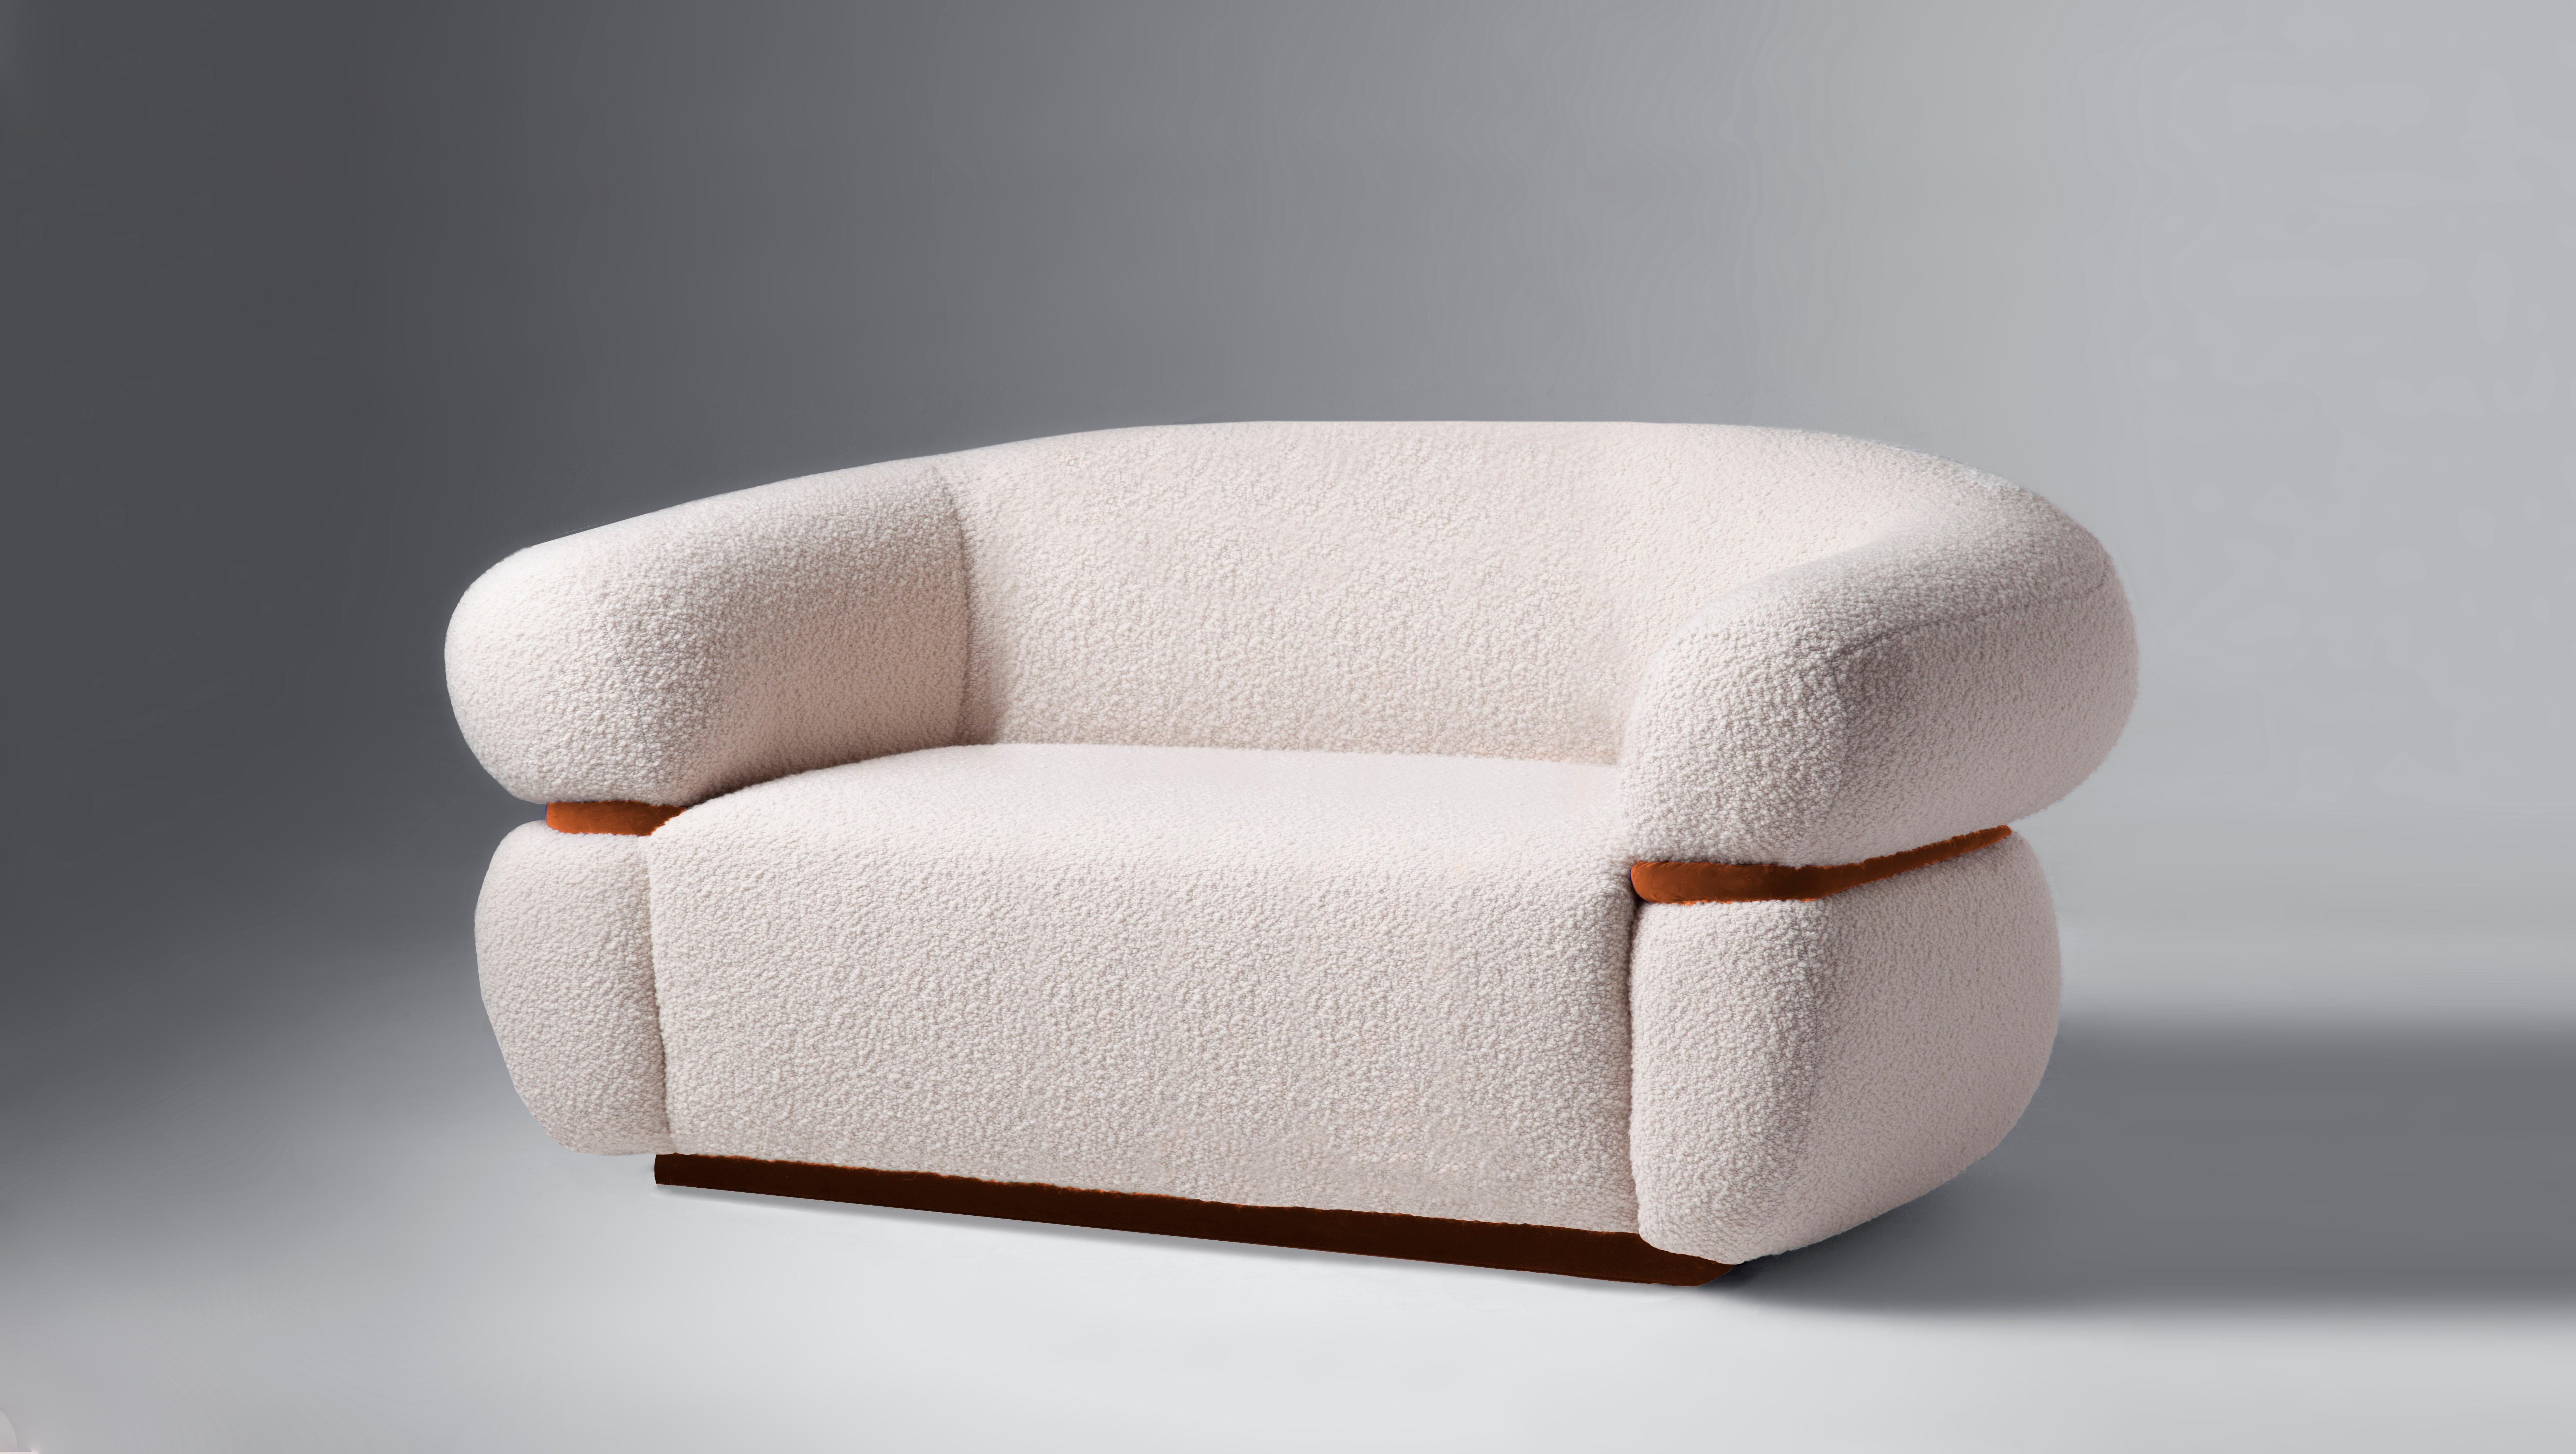 Like a warm embrace, Malibu Sofa welcomes you to stay within and relax. An elevated homage to the golden age of midcentury design and organic architecture, it radiates through its unusual proportions and strong curves with softness and Fine